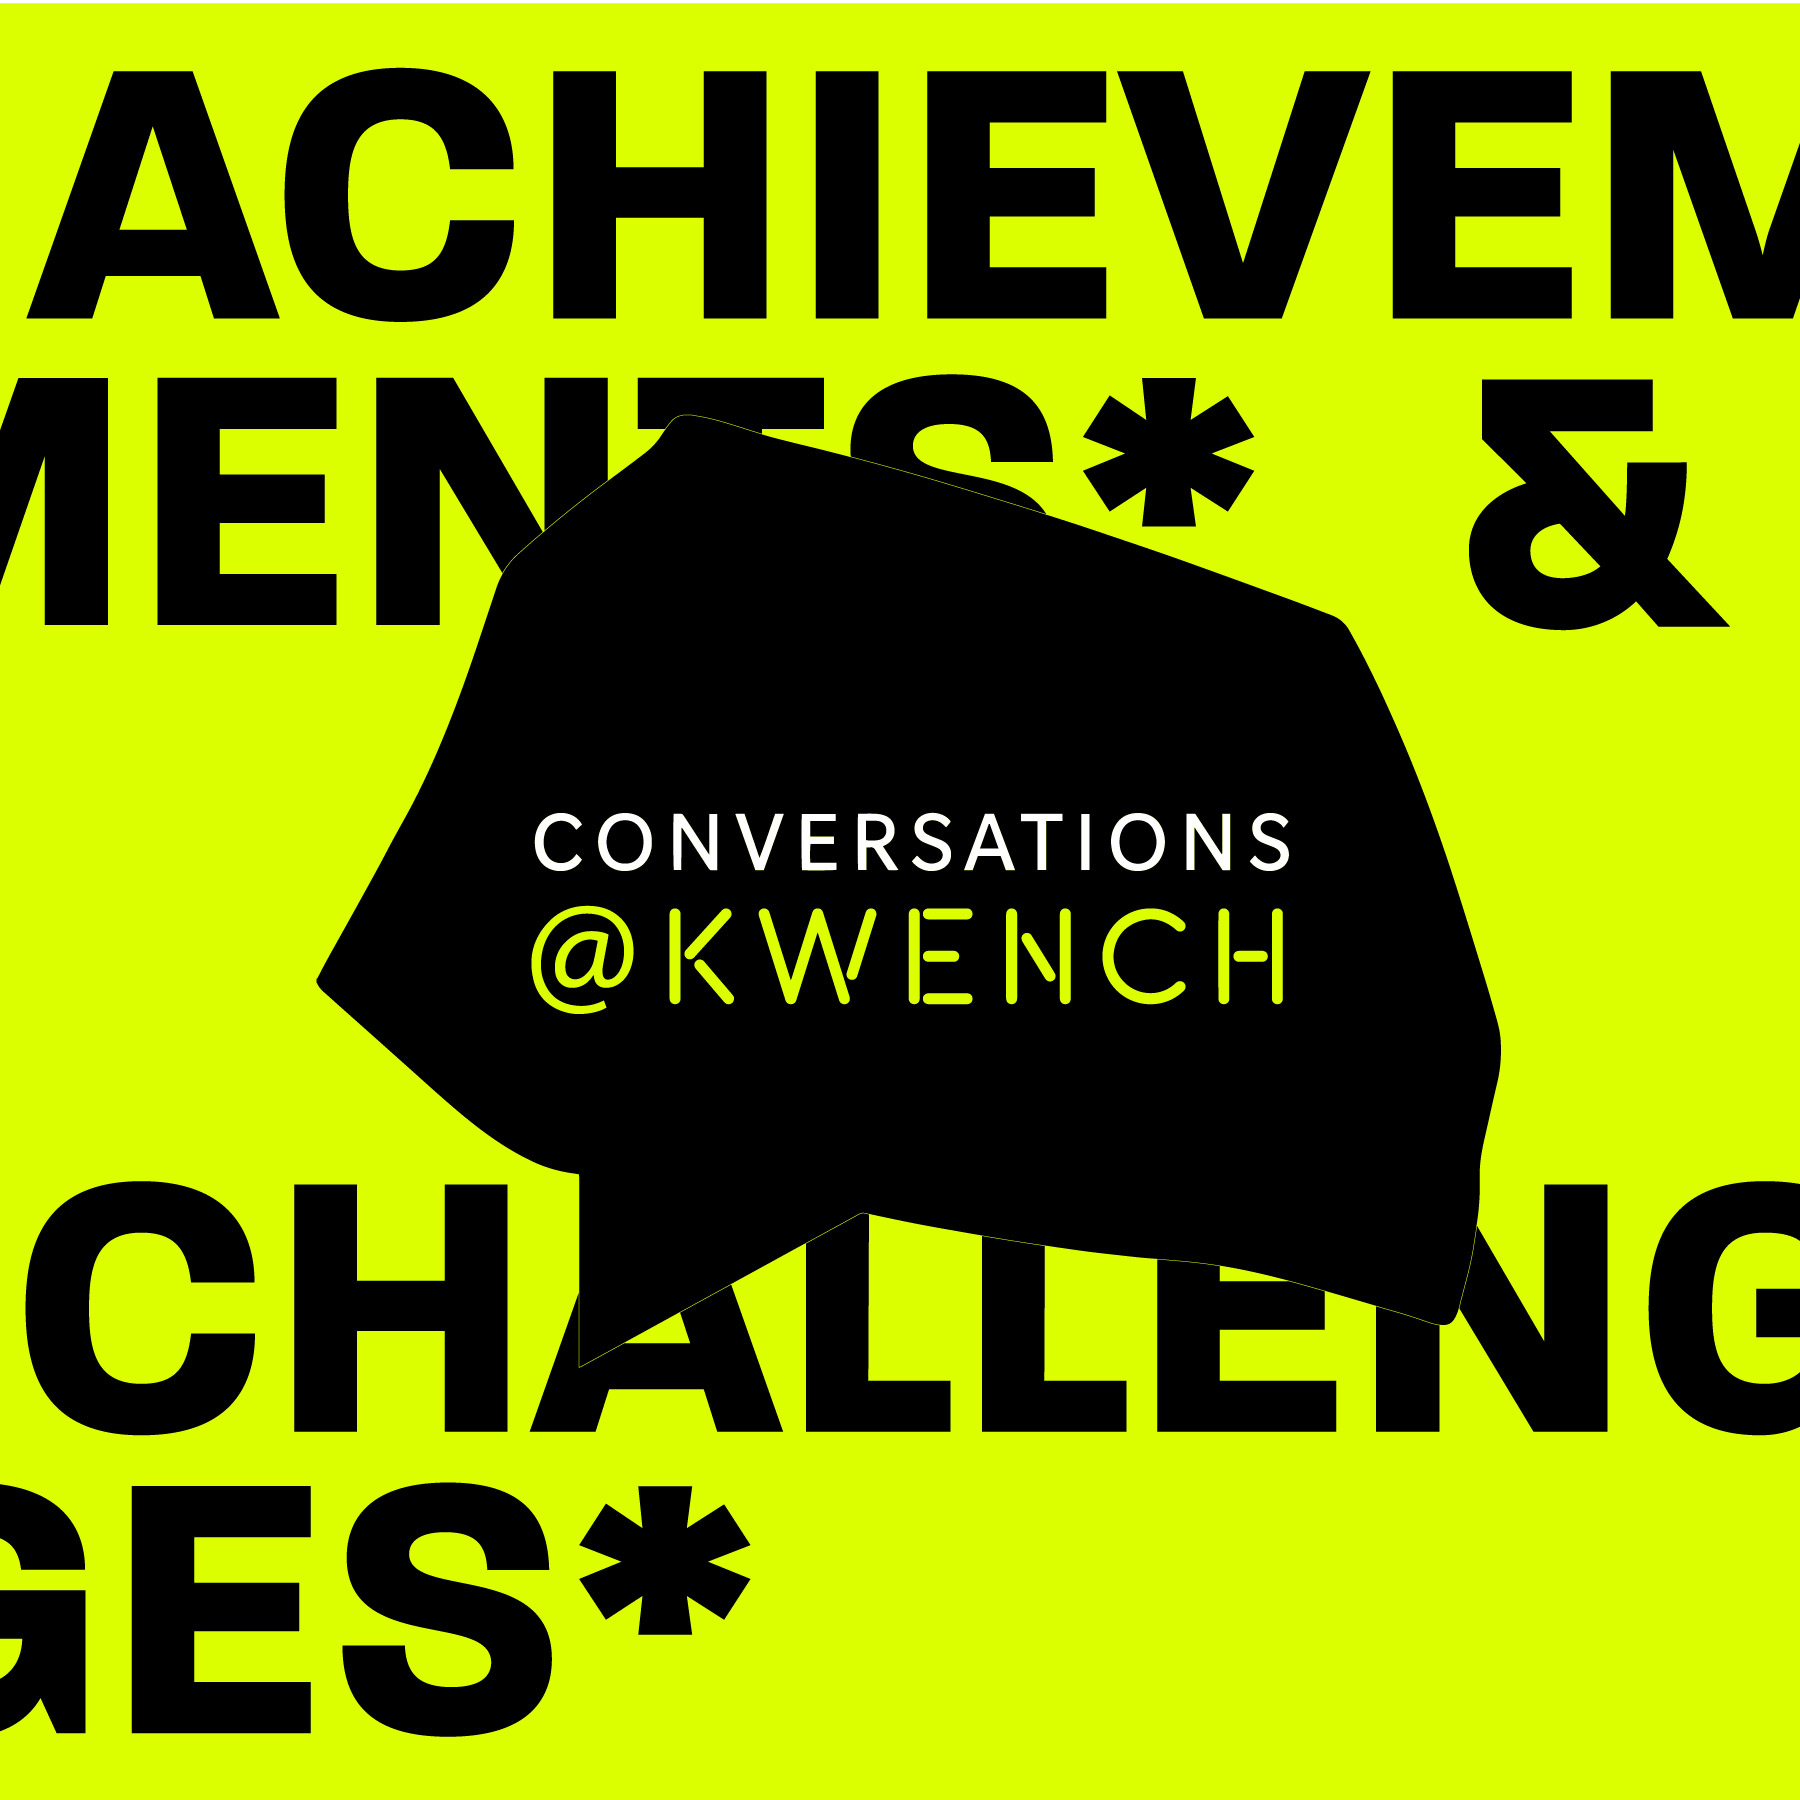 Conversations @ KWENCH Females in Professional Sports: Challenges and Achievements